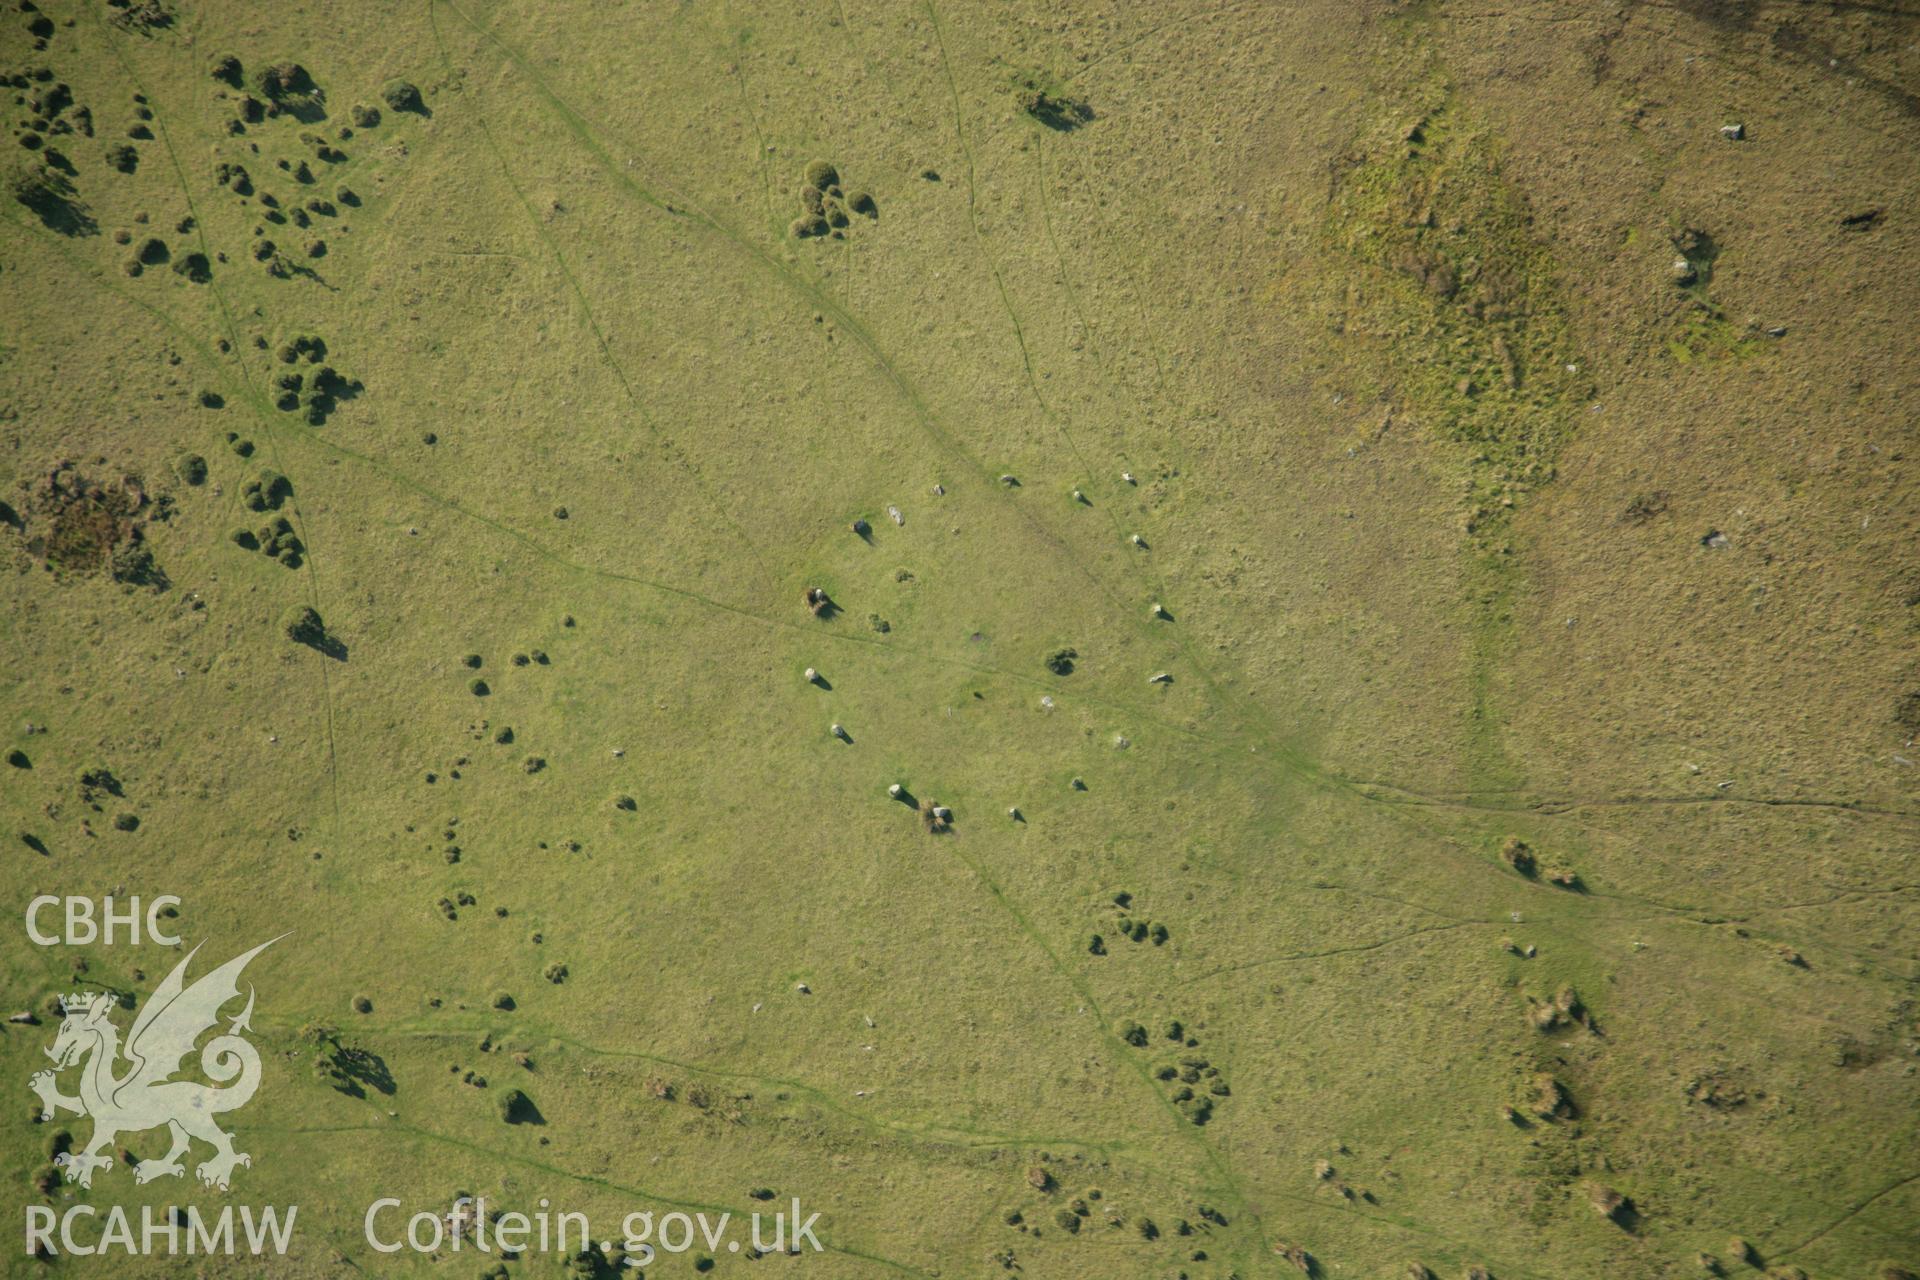 RCAHMW colour oblique photograph of Gors Fawr stone circle. Taken by Toby Driver on 23/10/2007.